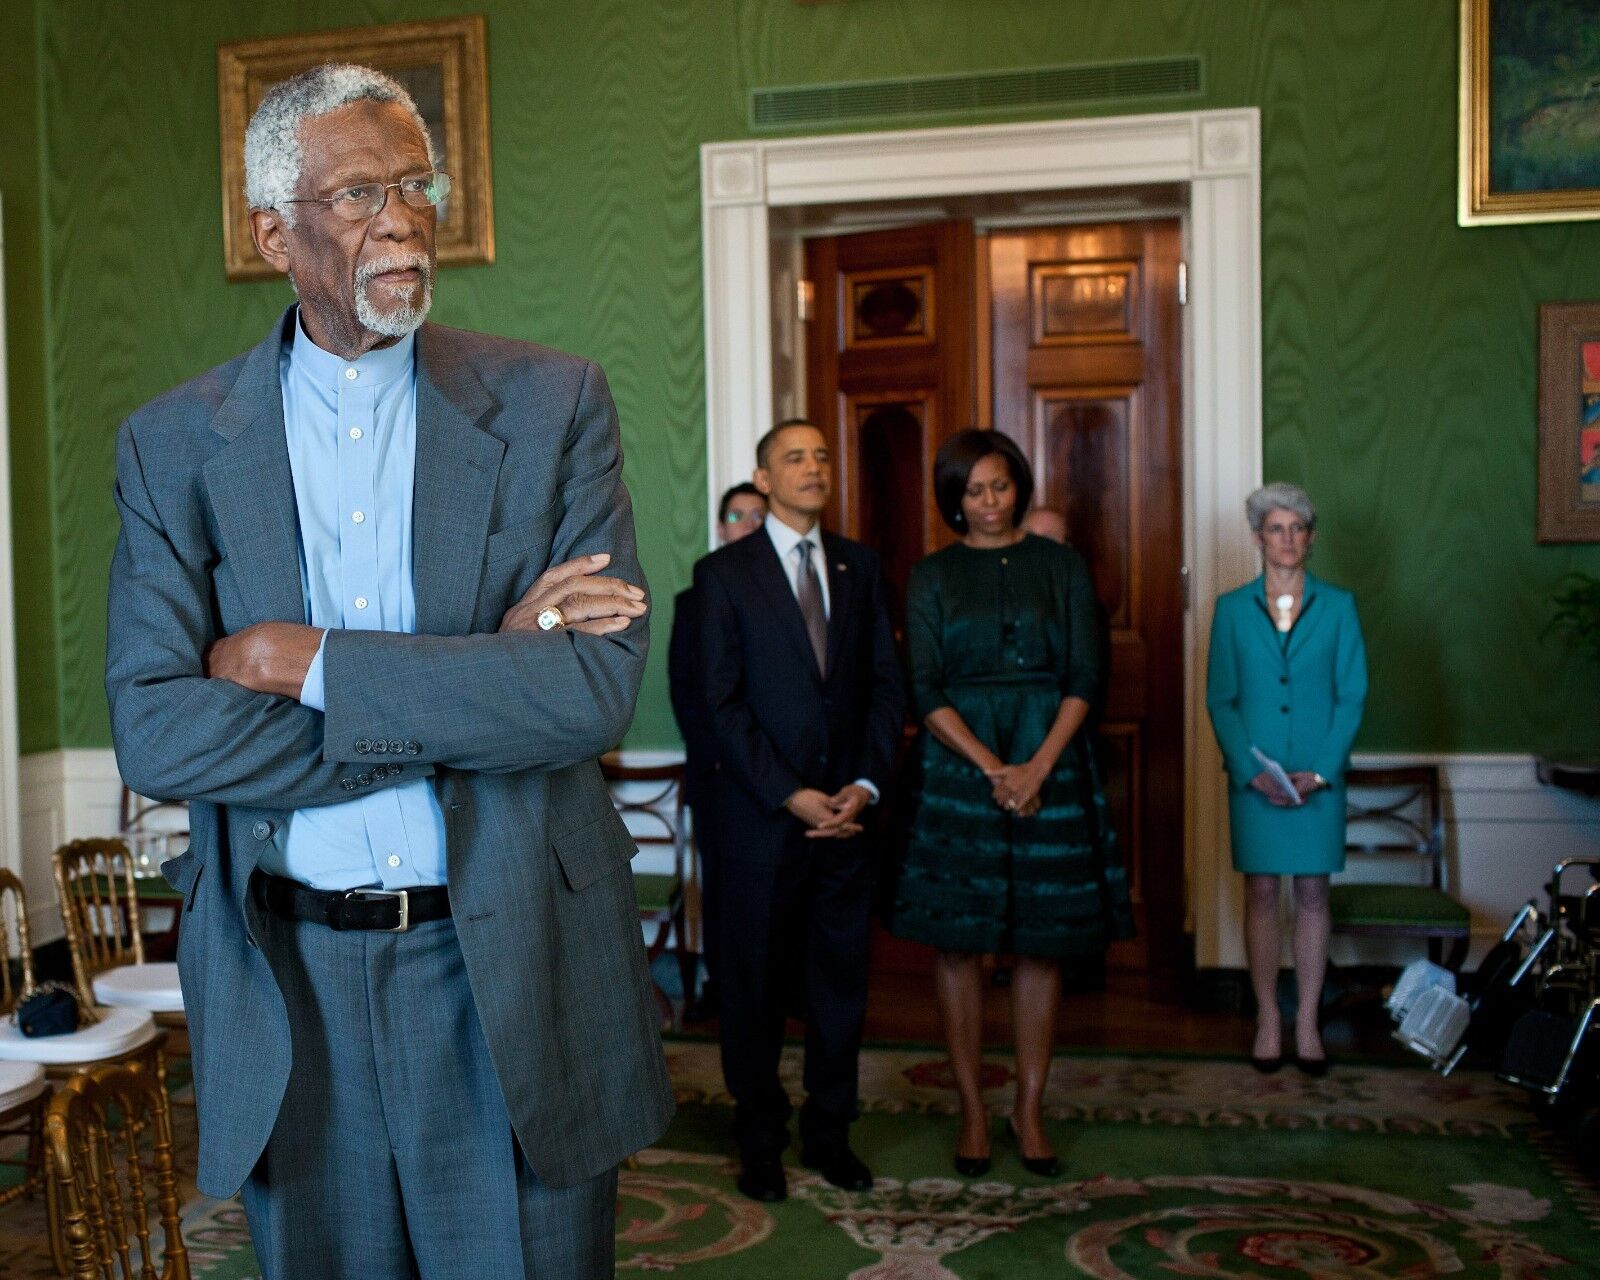 PRESIDENT BARACK OBAMA WITH BASKETBALL LEGEND BILL RUSSELL - 8X10 PHOTO (ZY-507)